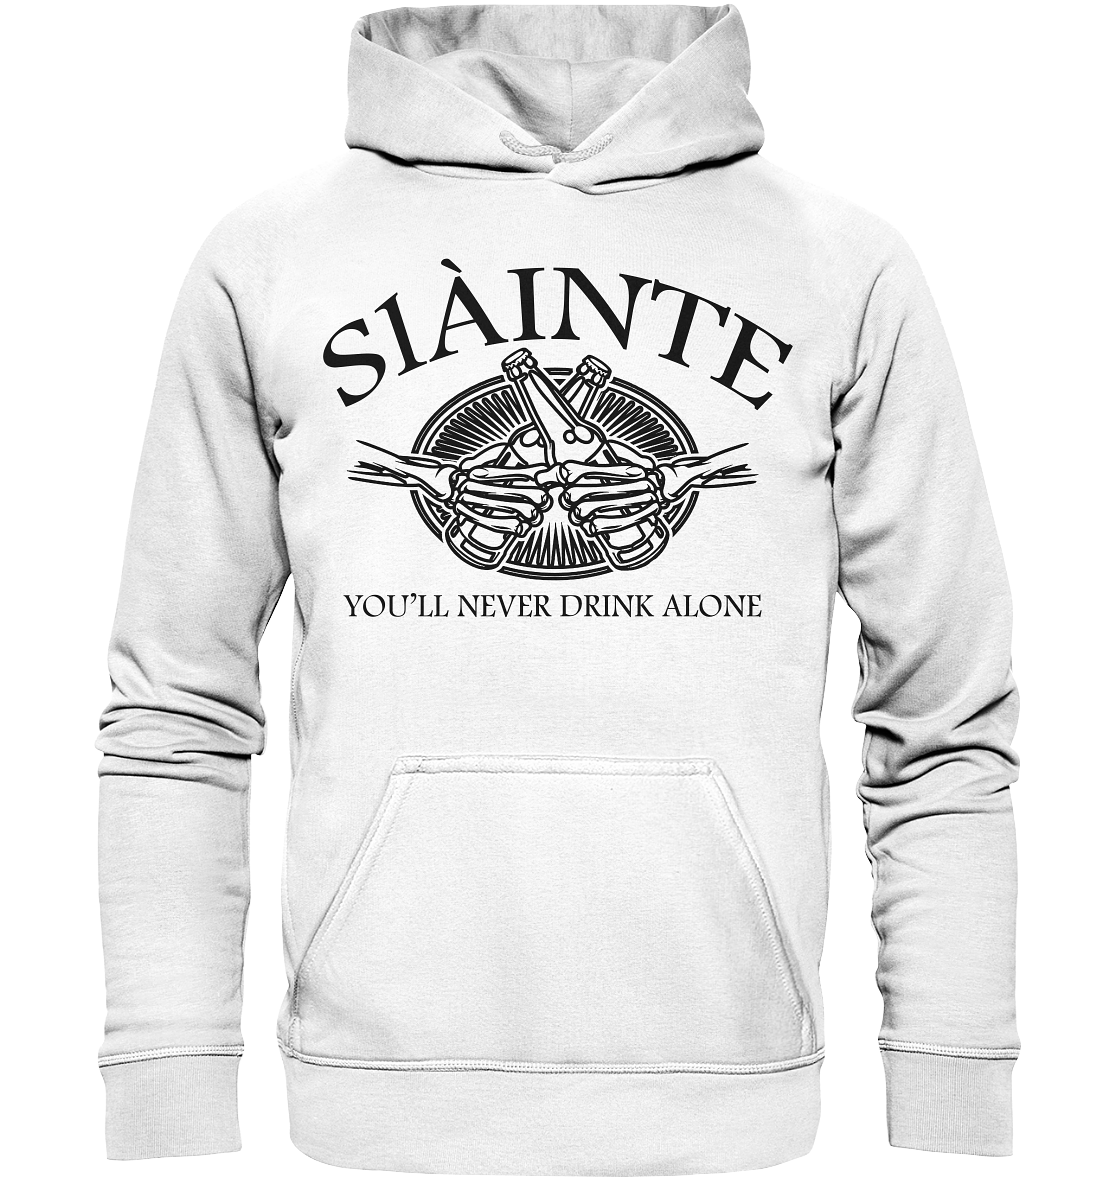 Sláinte "You'll Never Drink Alone" - Basic Unisex Hoodie